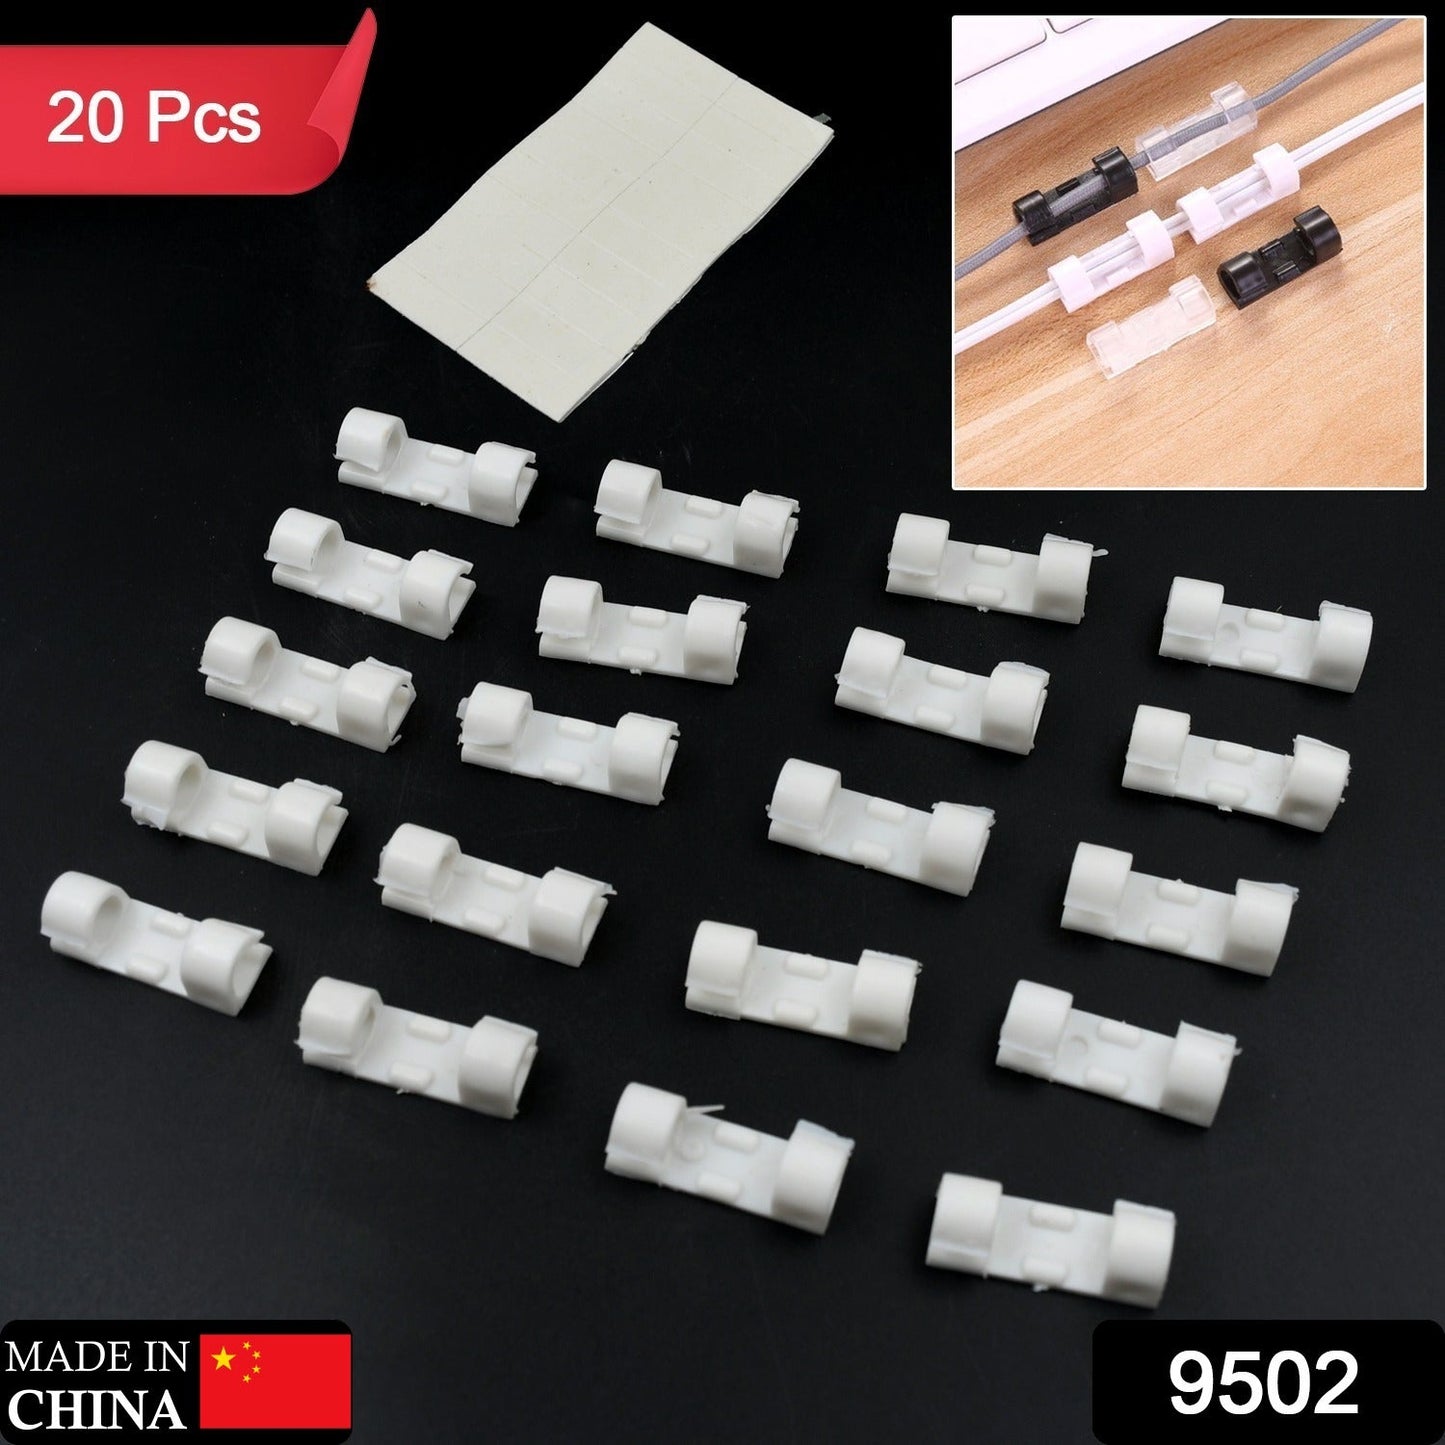 9502 Plastic Clips Stronger Adhesive Tape | Cable Manager | Wire Manager | Wire Clamp | Wire Clips for Cable| Cable Organizer Cord Holder | Cord Clips for Car, Office and Home (20 Pcs Set)